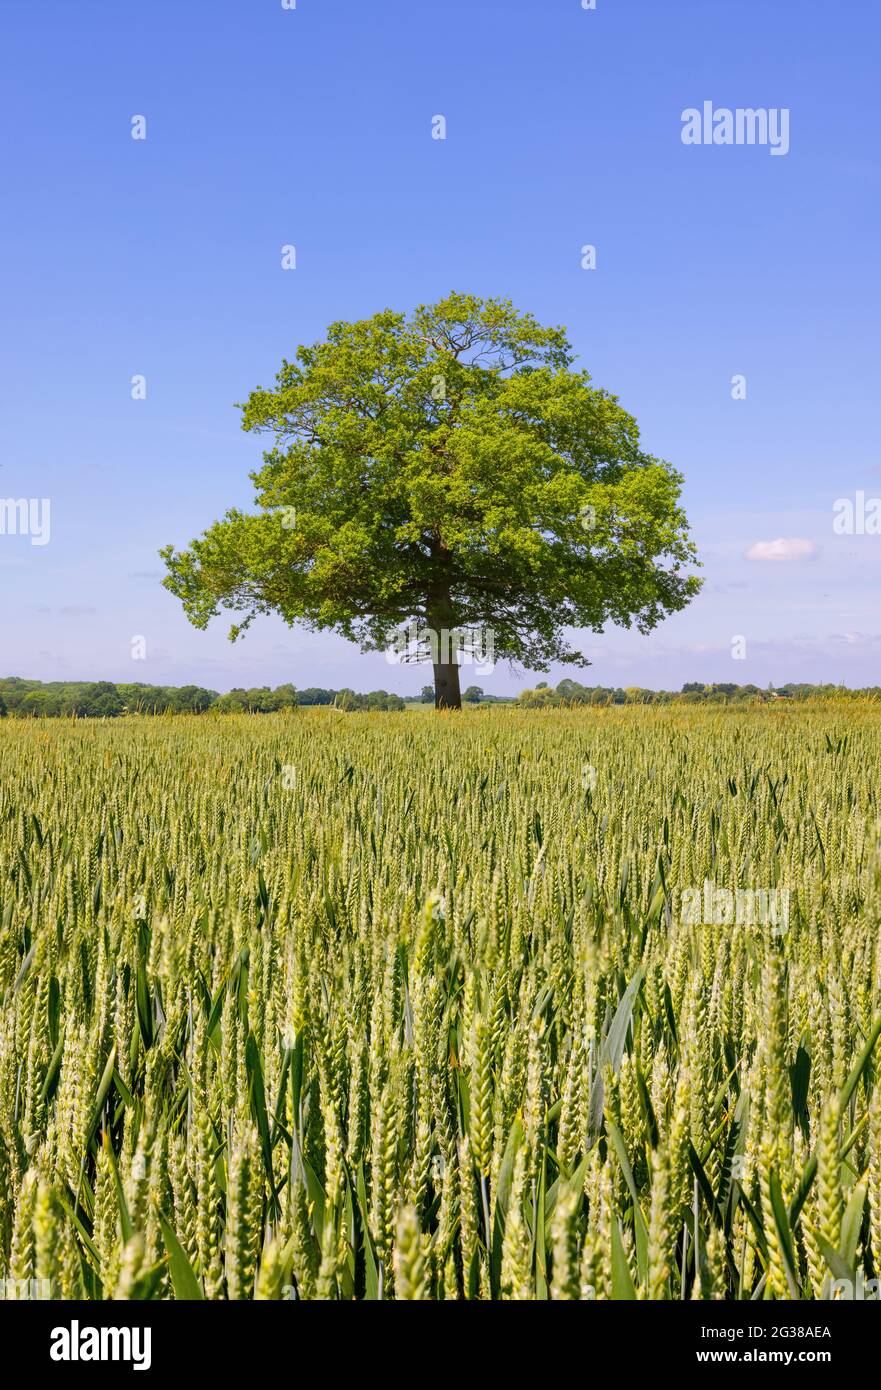 Solitary oak tree in a field of green wheat with blue sky. UK. Stock Photo